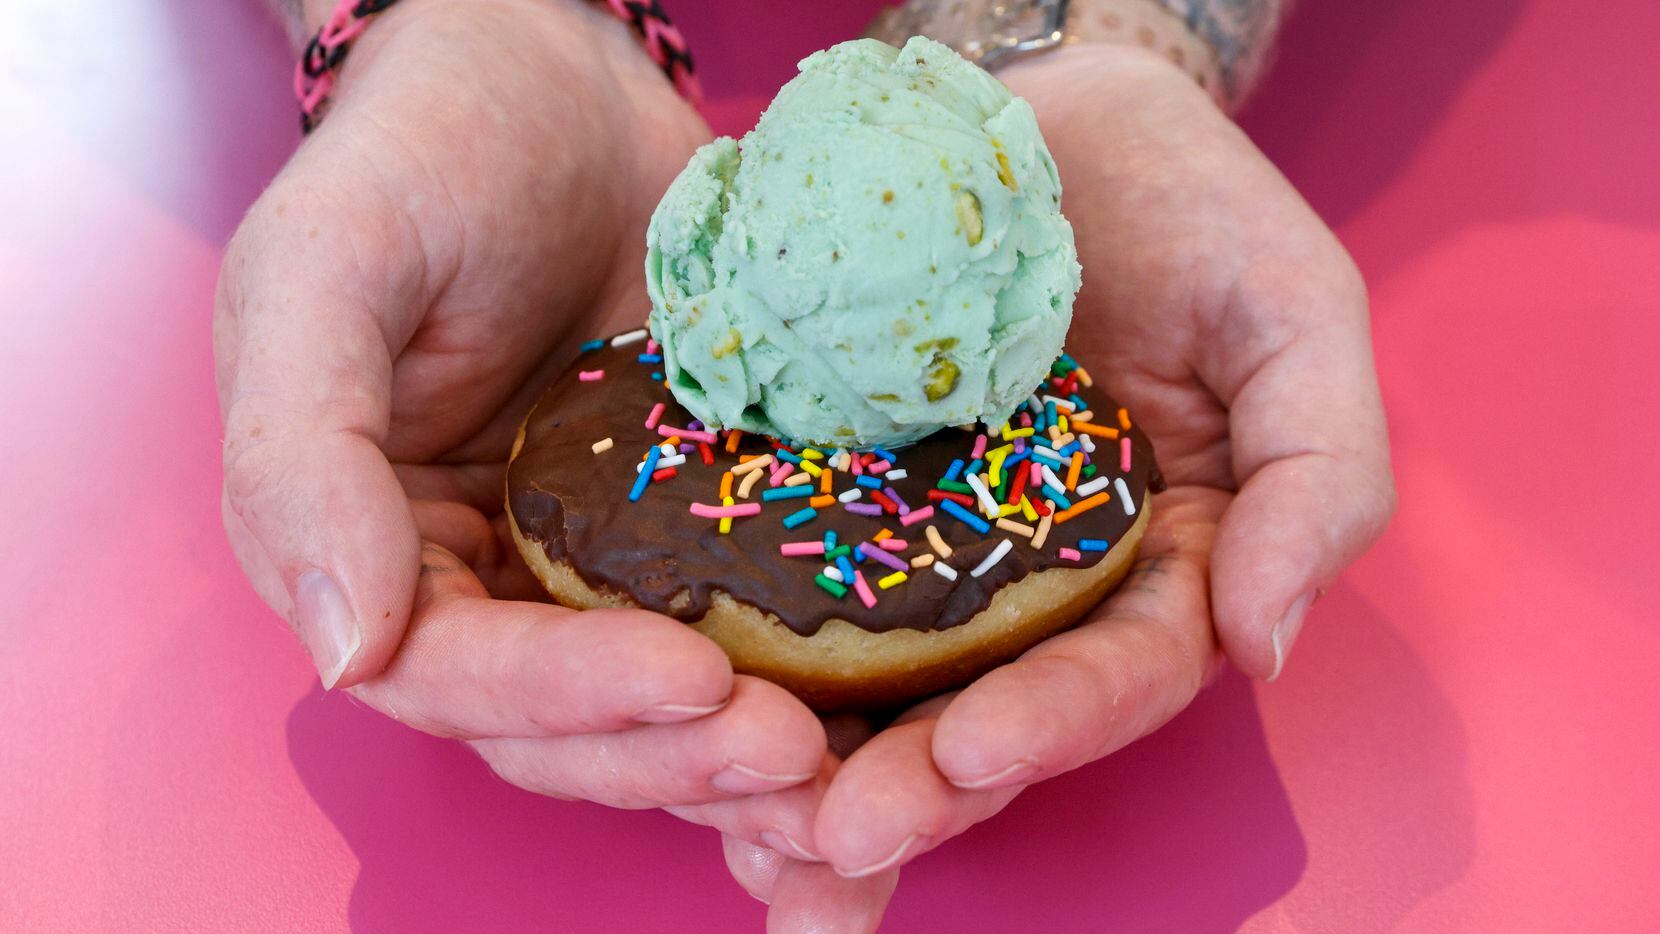 Chef Parker Howard holds a vegan chocolate glazed doughnut with sprinkles and a scoop of...